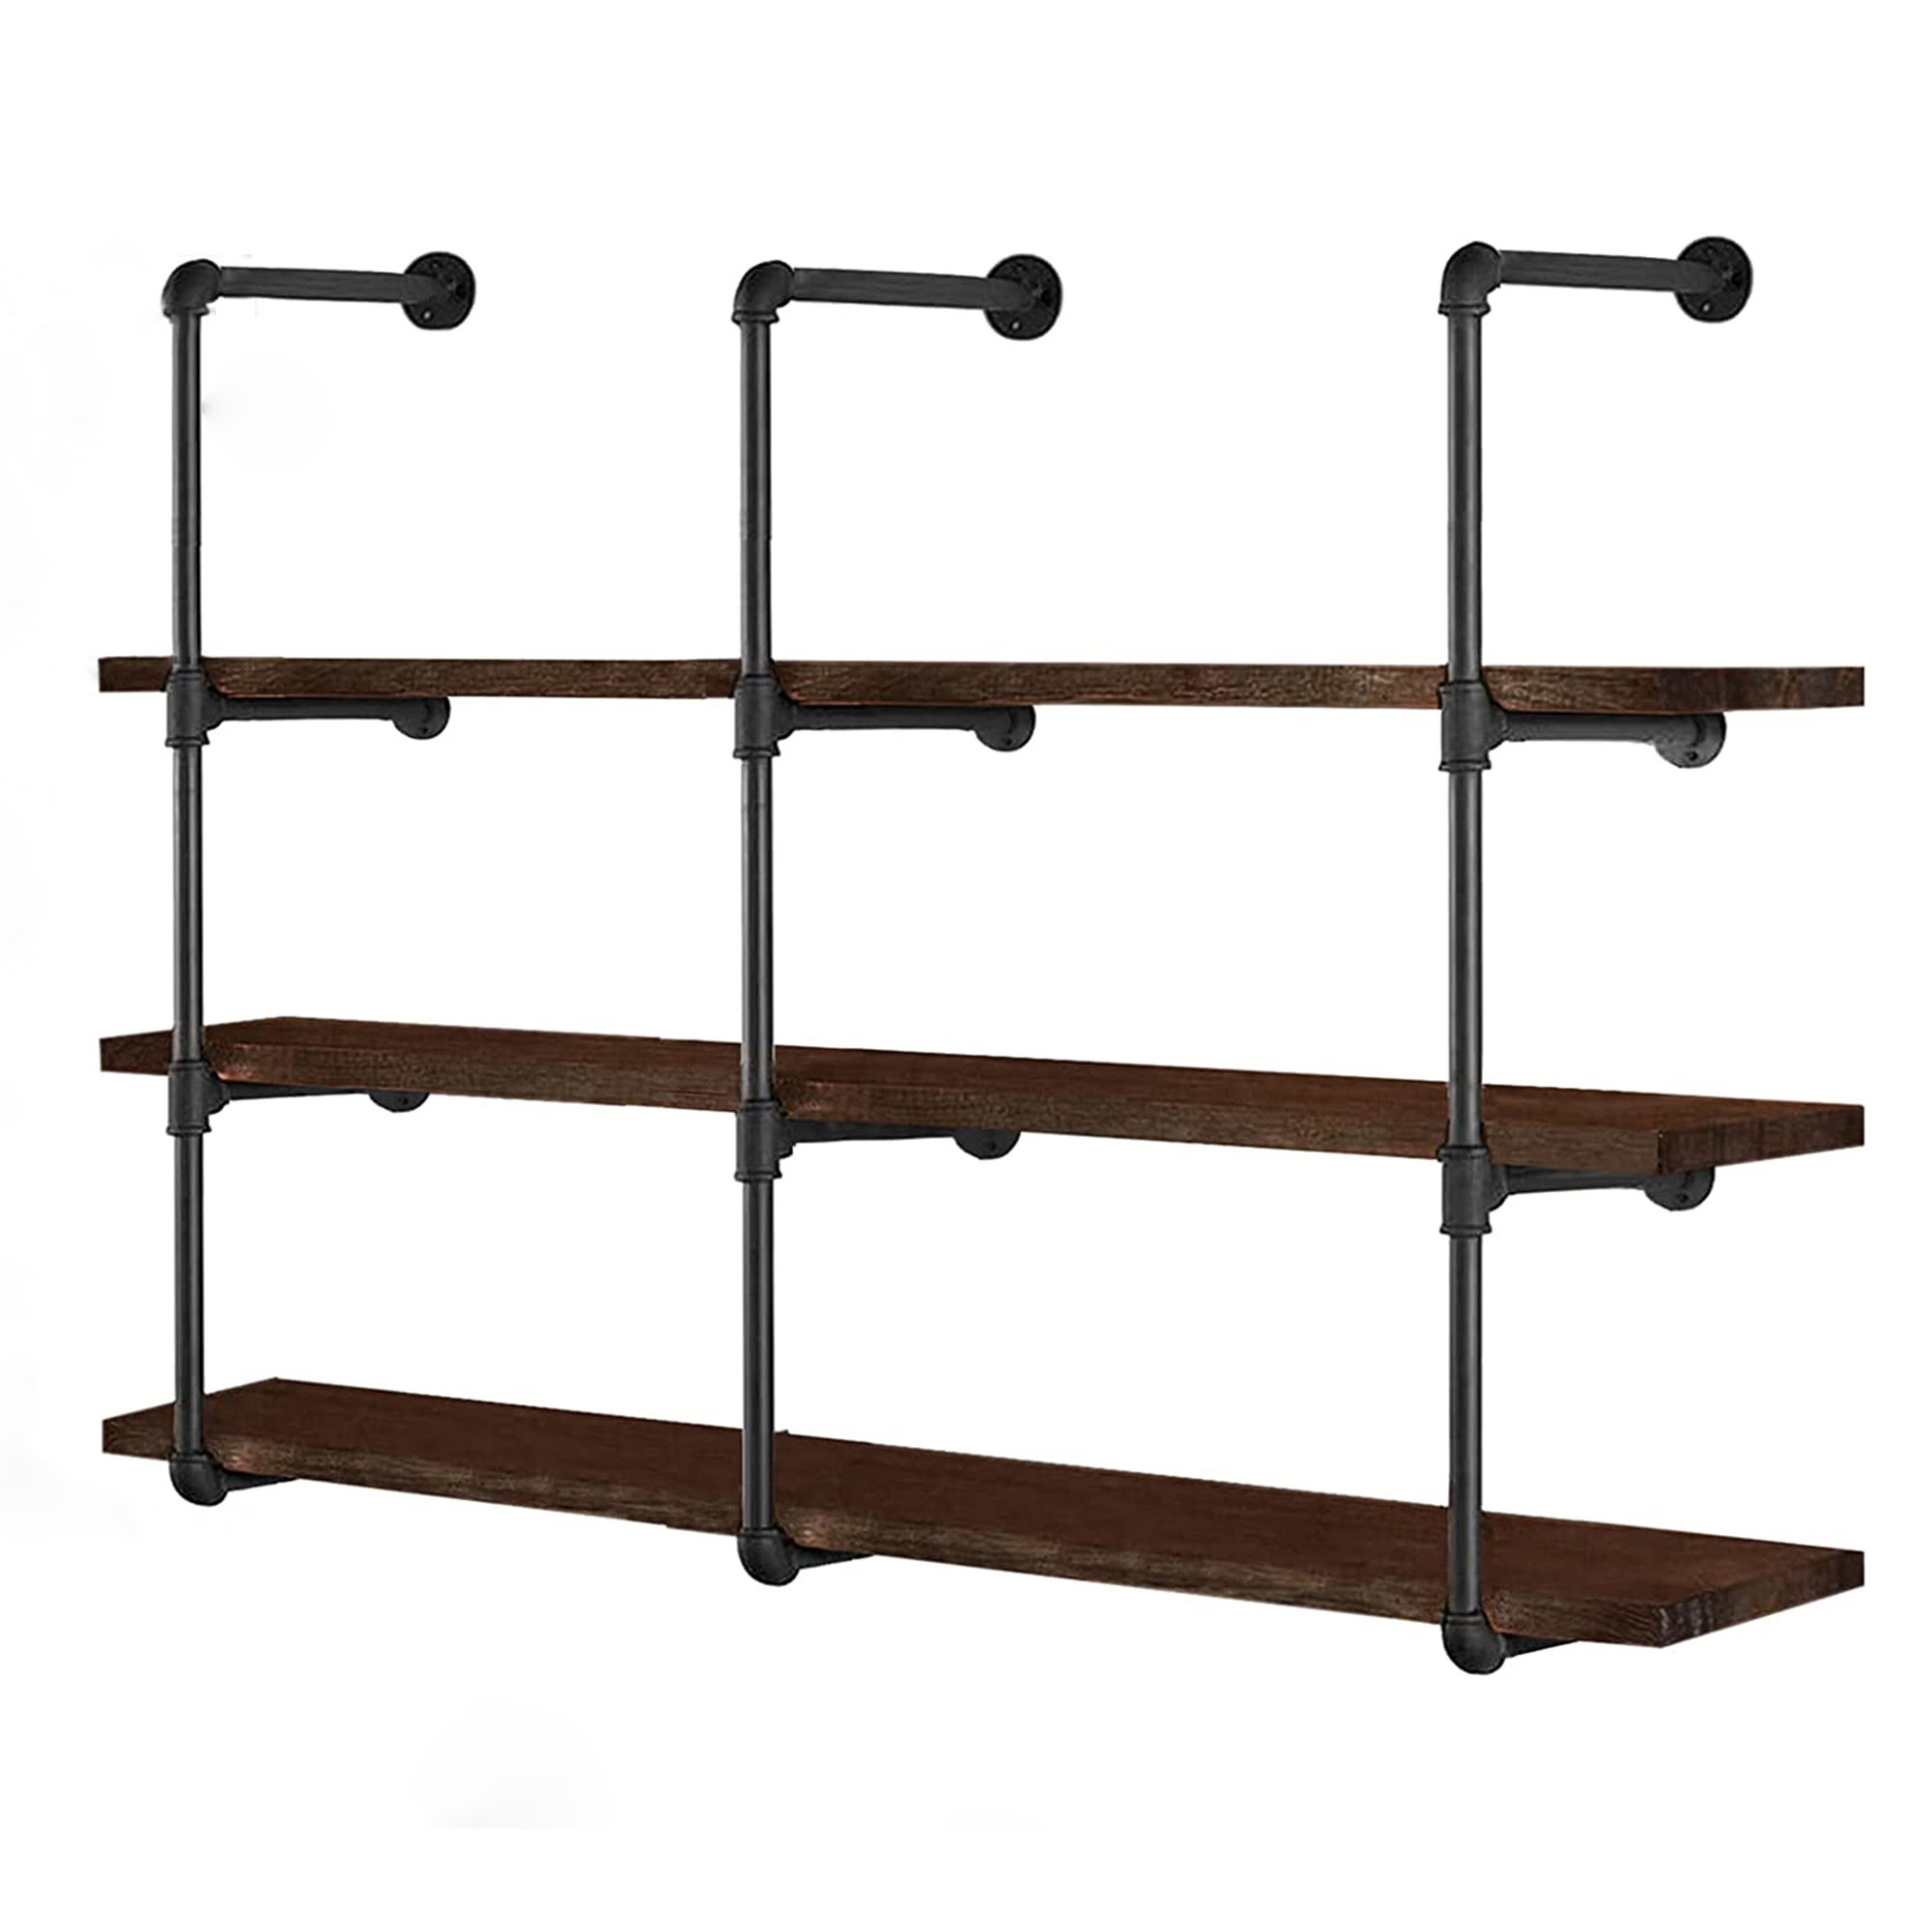 & Shelf Flanges | Reviews Planks 3-Tiered Williston D.I.Y Included) Wayfair Not Pipe Friedeborn Black (Wood Metal Forge & Style Iron